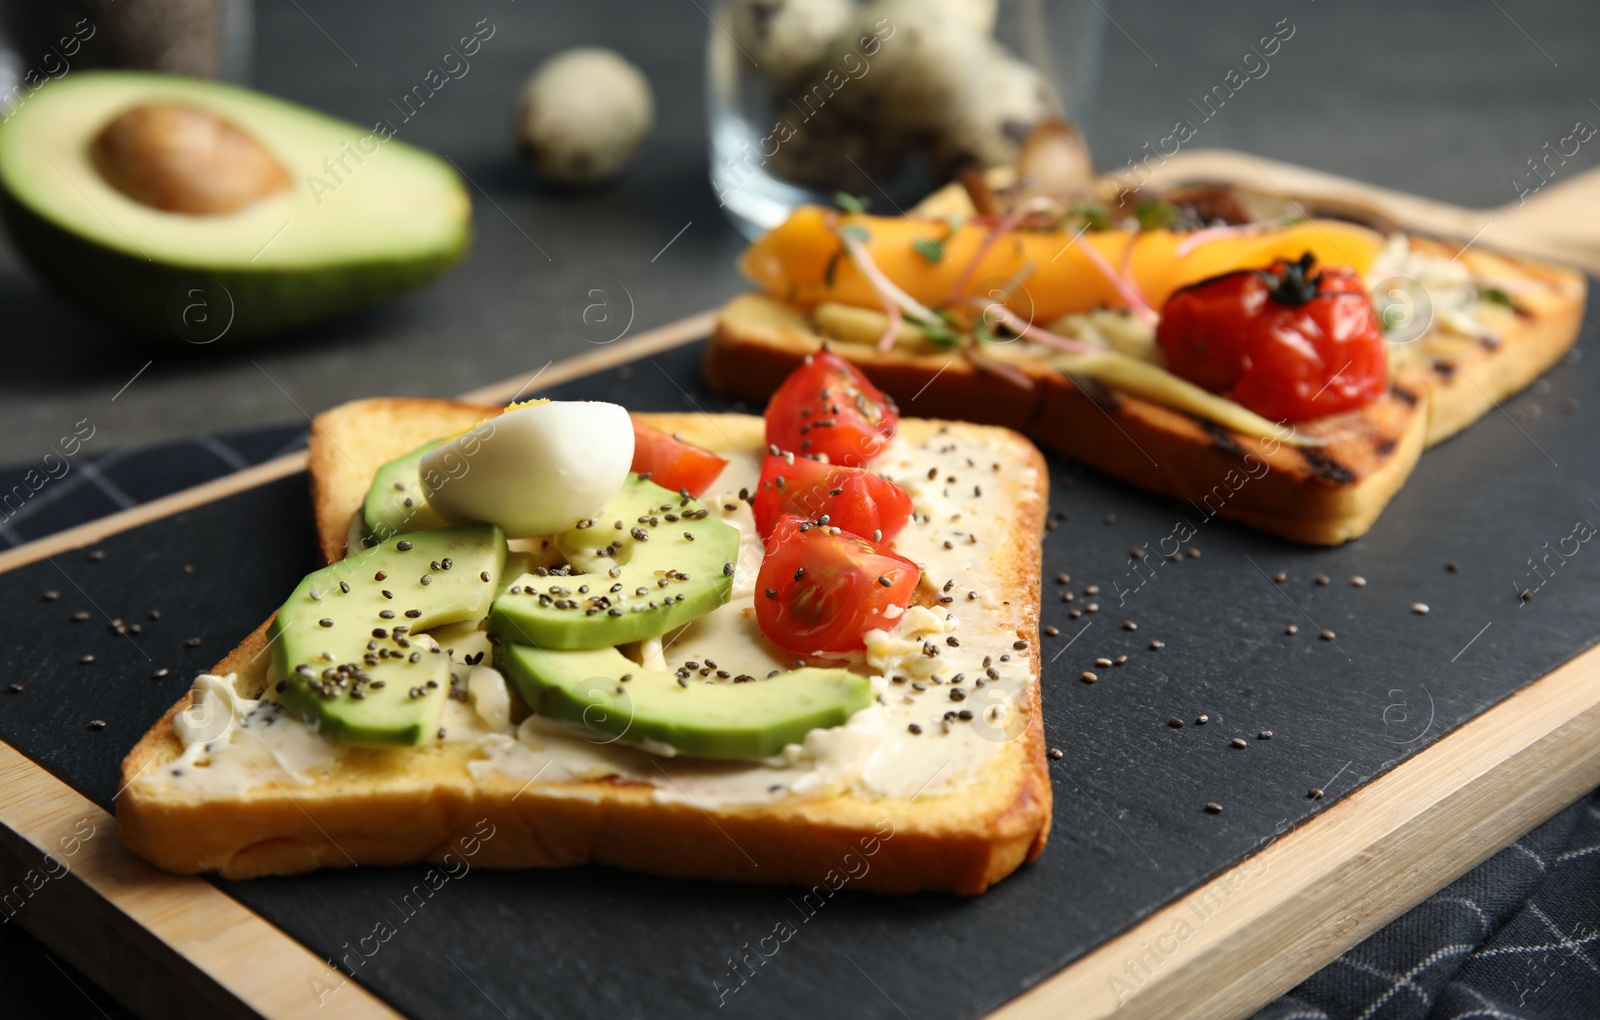 Photo of Toasts with avocado, cherry tomato, quail egg and chia seeds served on board